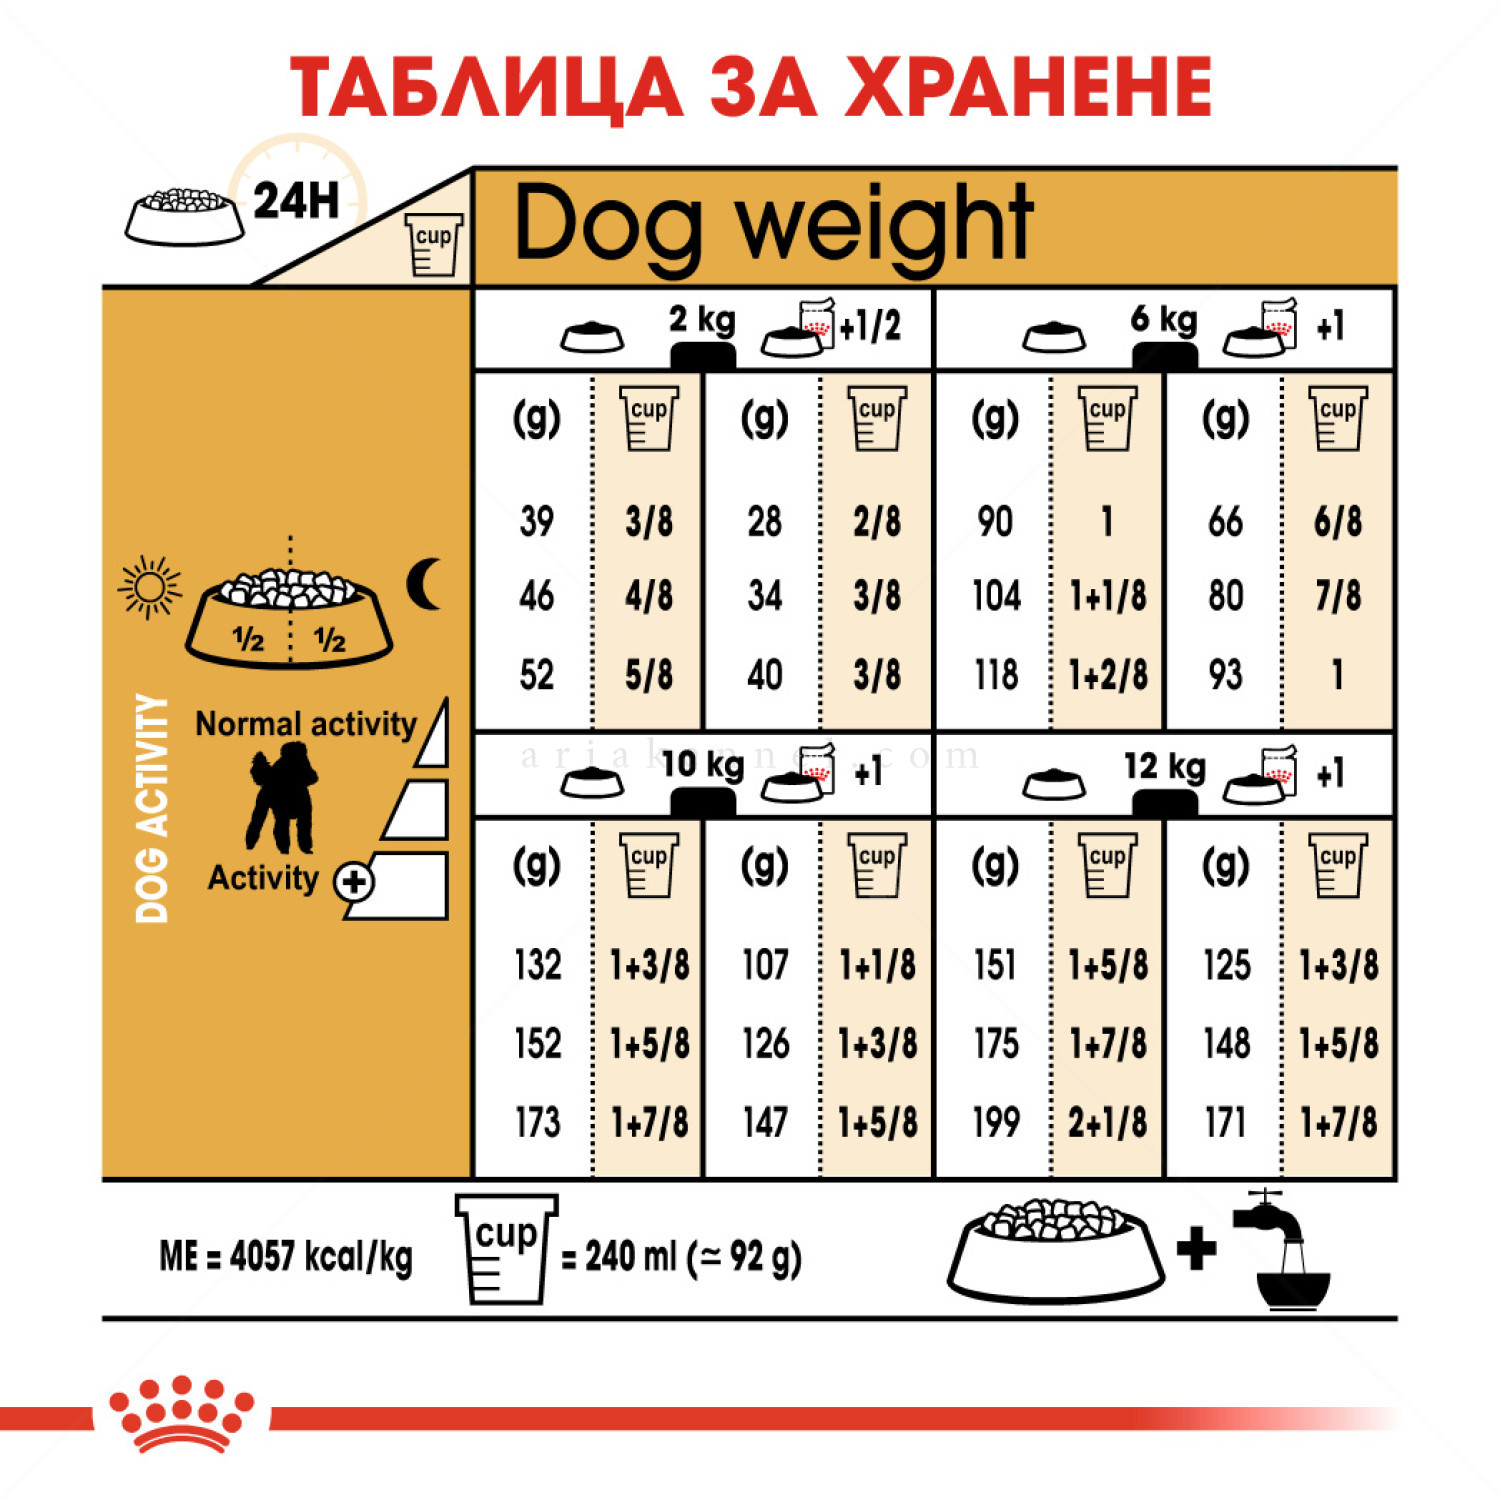 ROYAL CANIN Adult Poodle - 1.500 кг